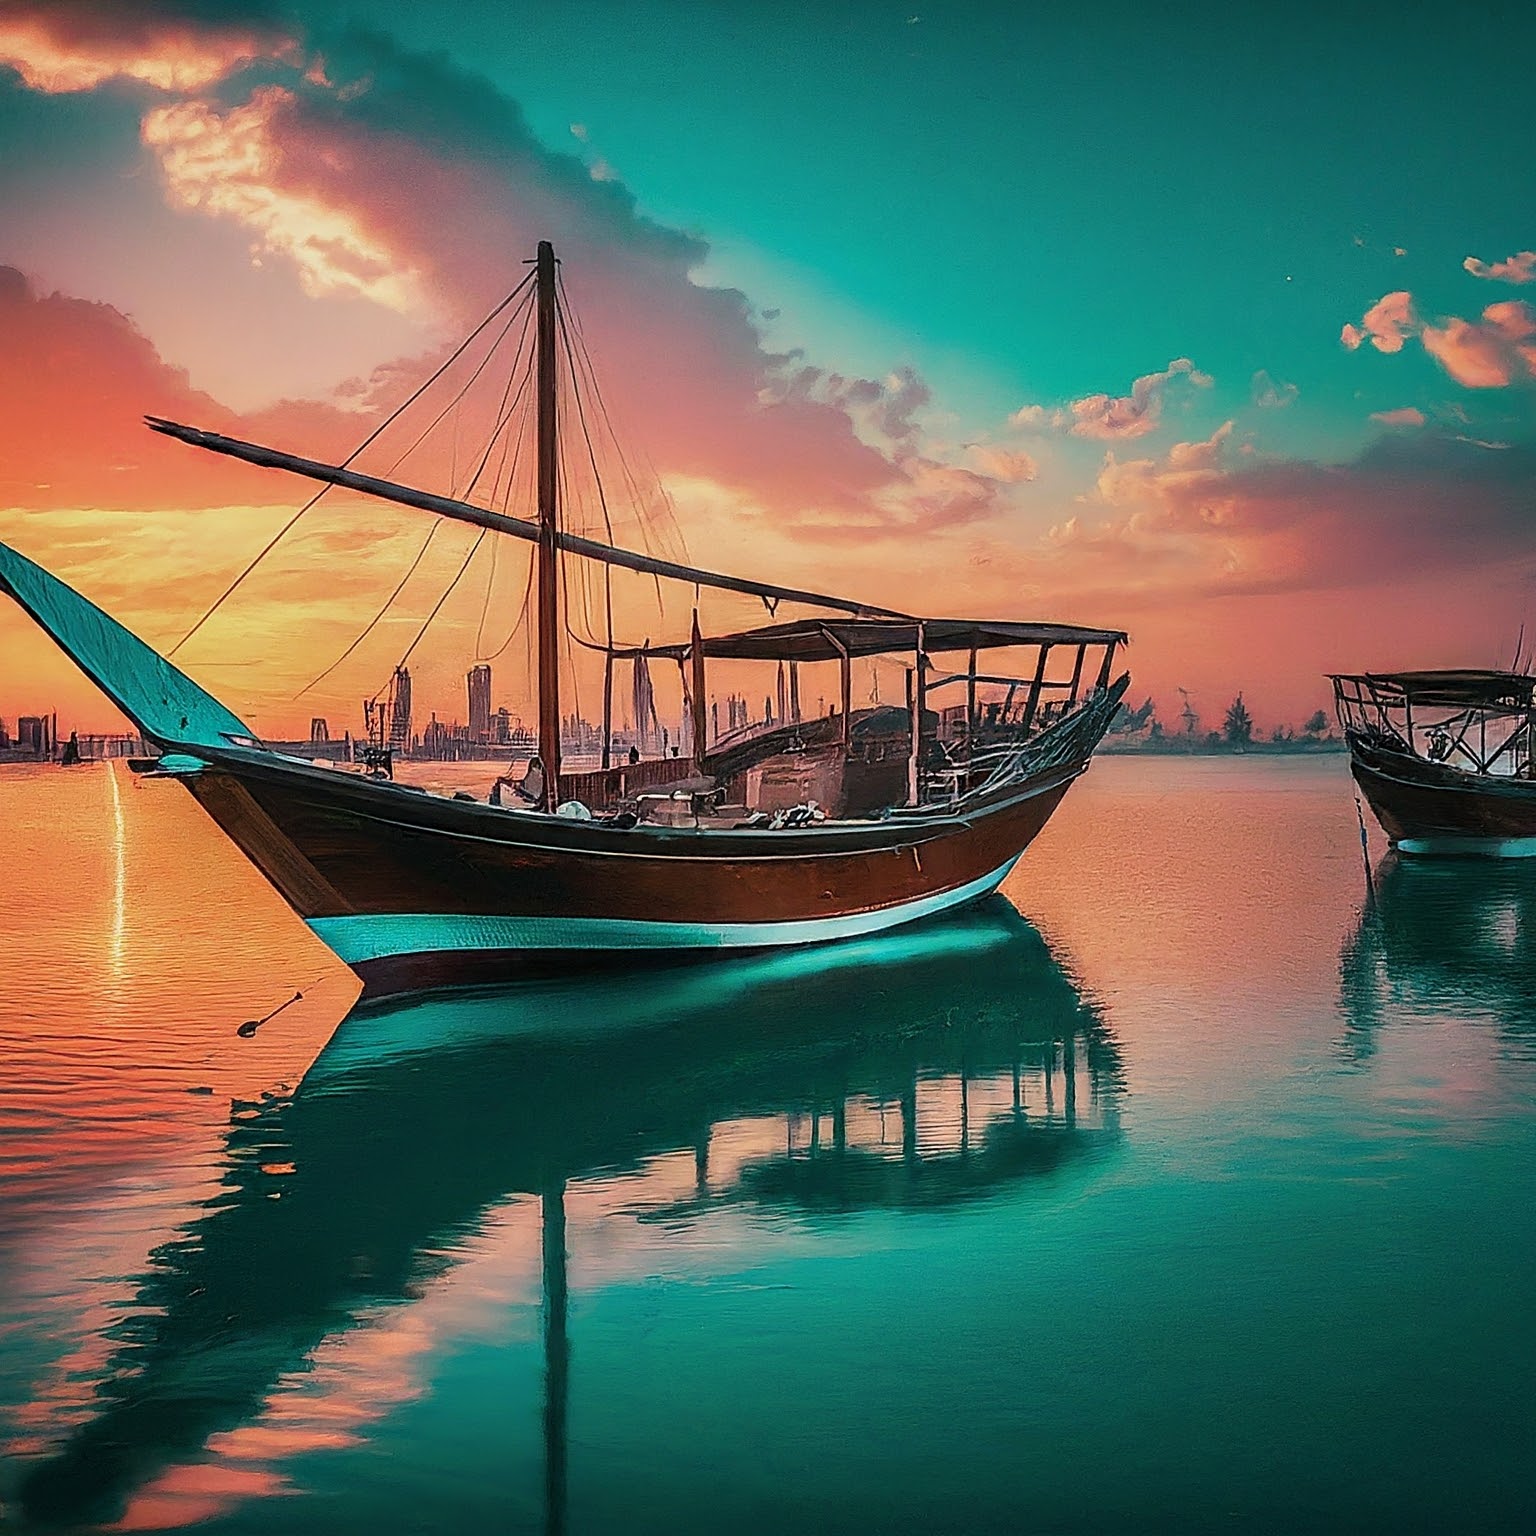 Al Wakrah dhow harbor at sunset, Qatar, with traditional dhows and colorful sky reflected on water.